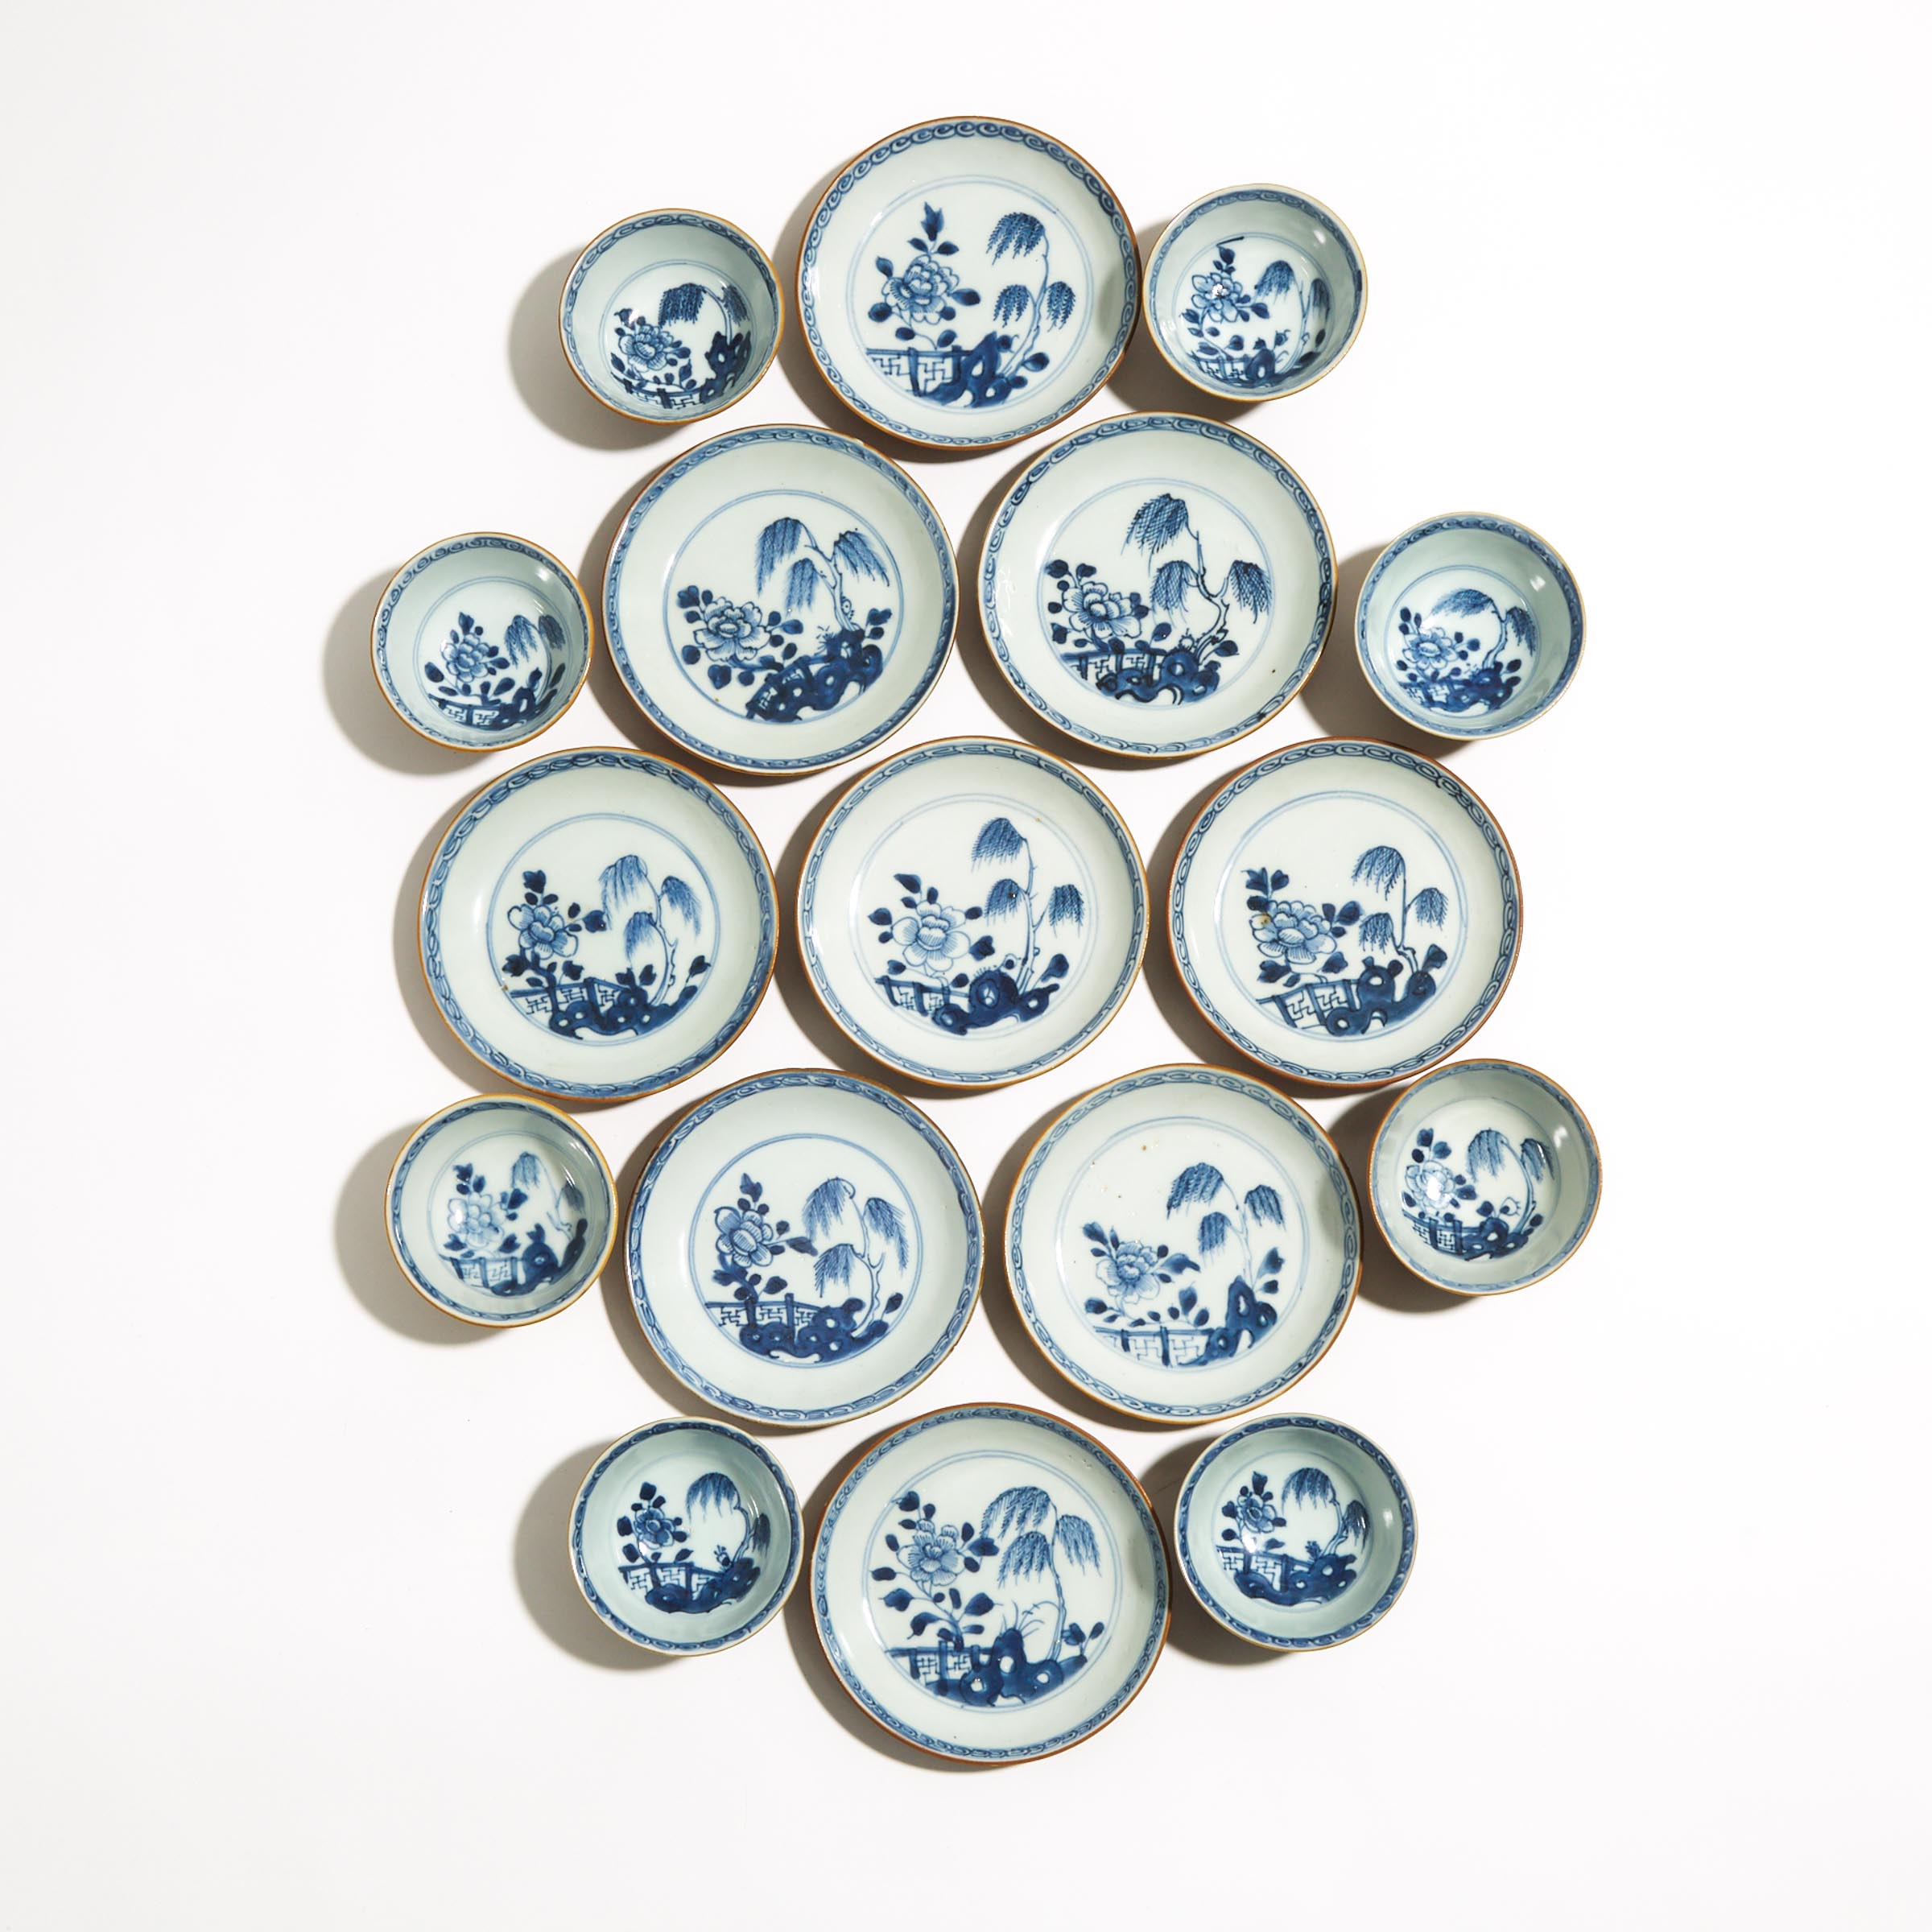 A Set of Seventeen 'Batavian Willow' Pattern Teabowls and Saucers from the Nanking Cargo, Qianlong Period, Circa 1750